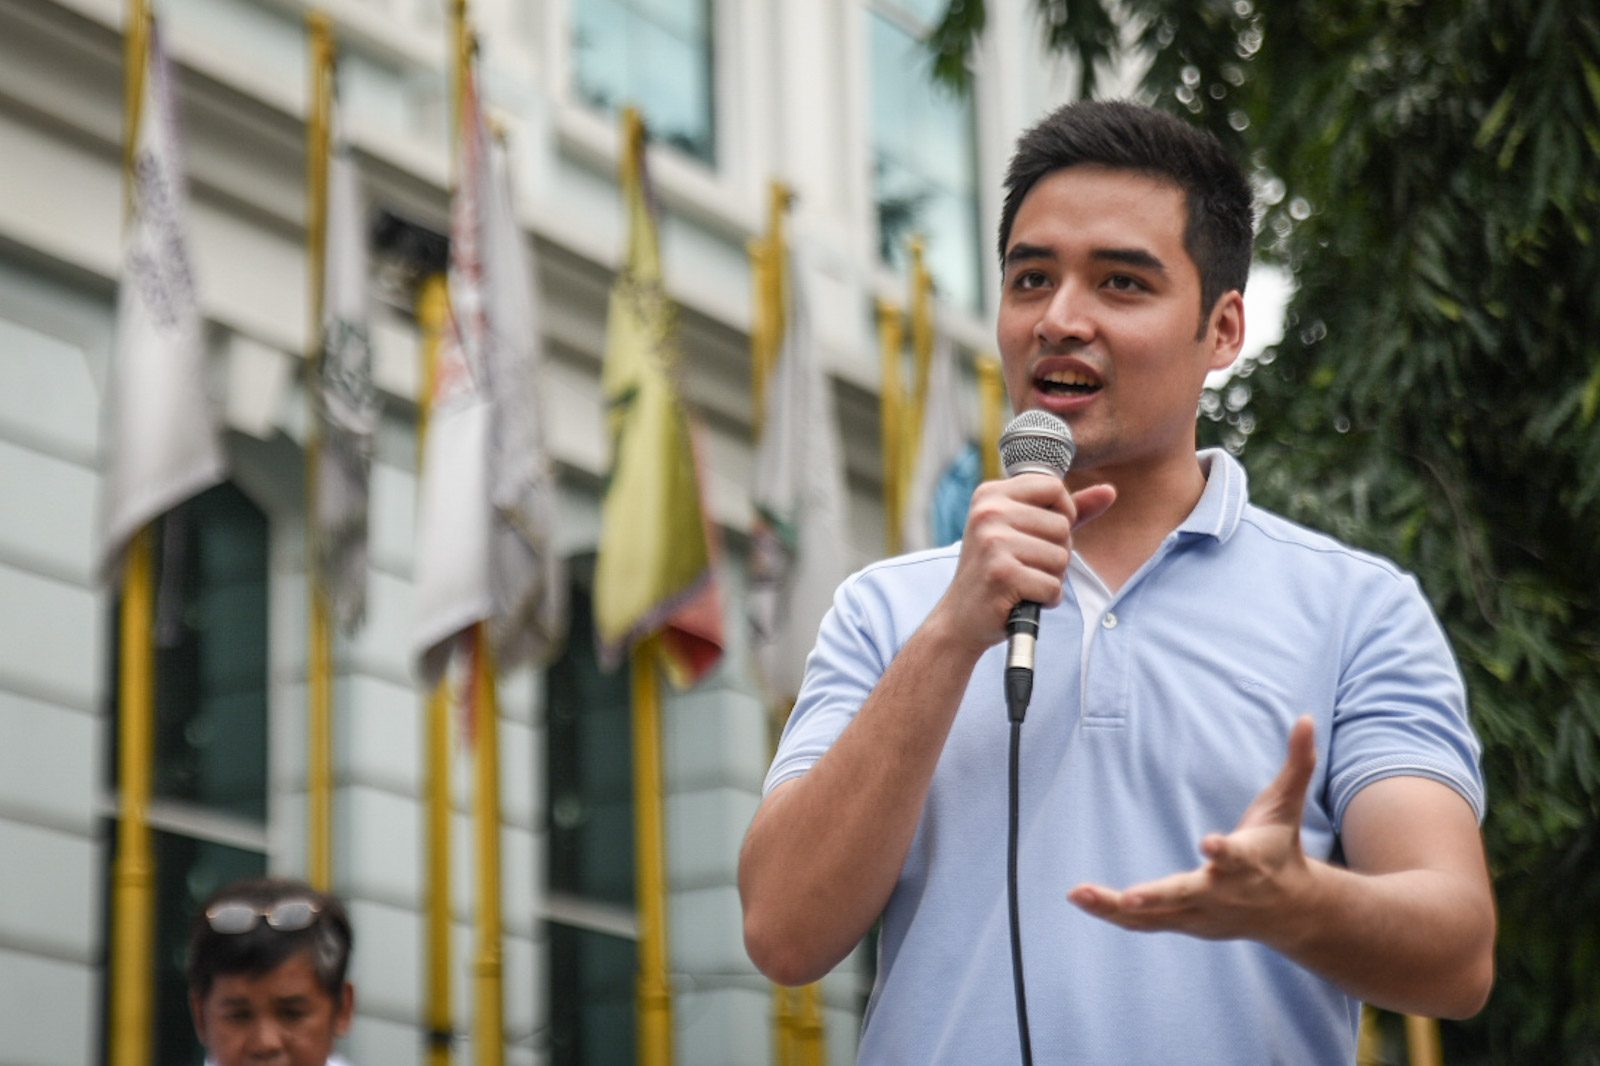 Pasig officials charged as Vico Sotto cracks down on illegal businesses, fixers